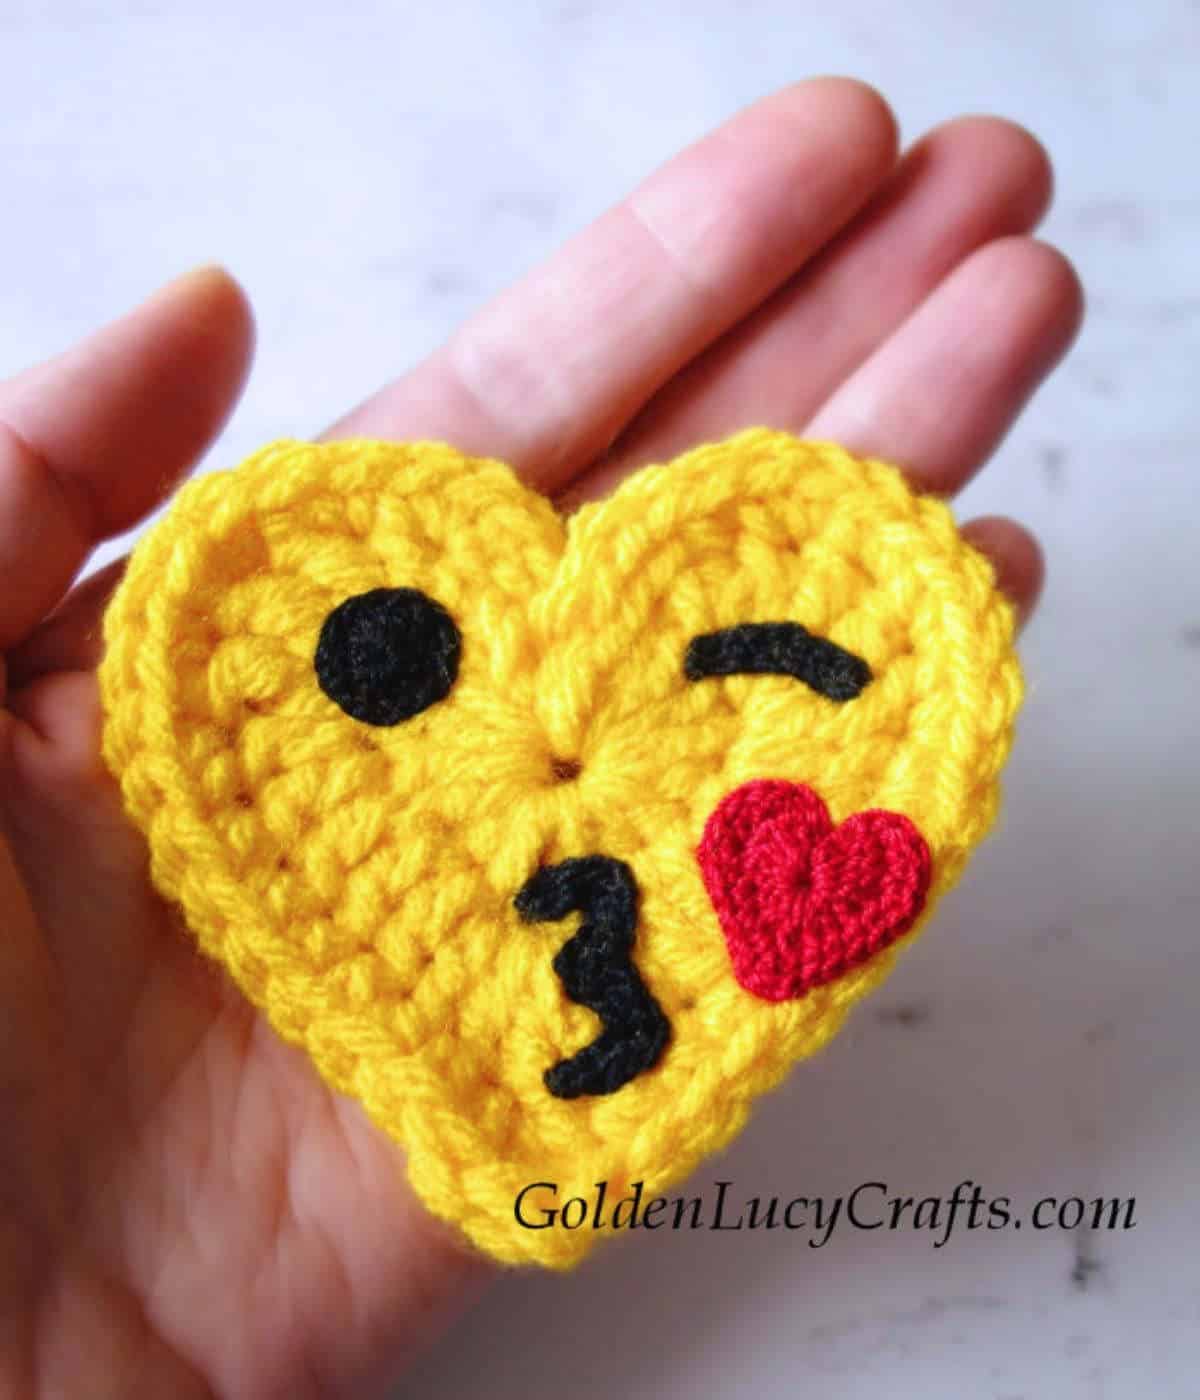 Crochet blowing a kiss emoji in the palm of a hand.